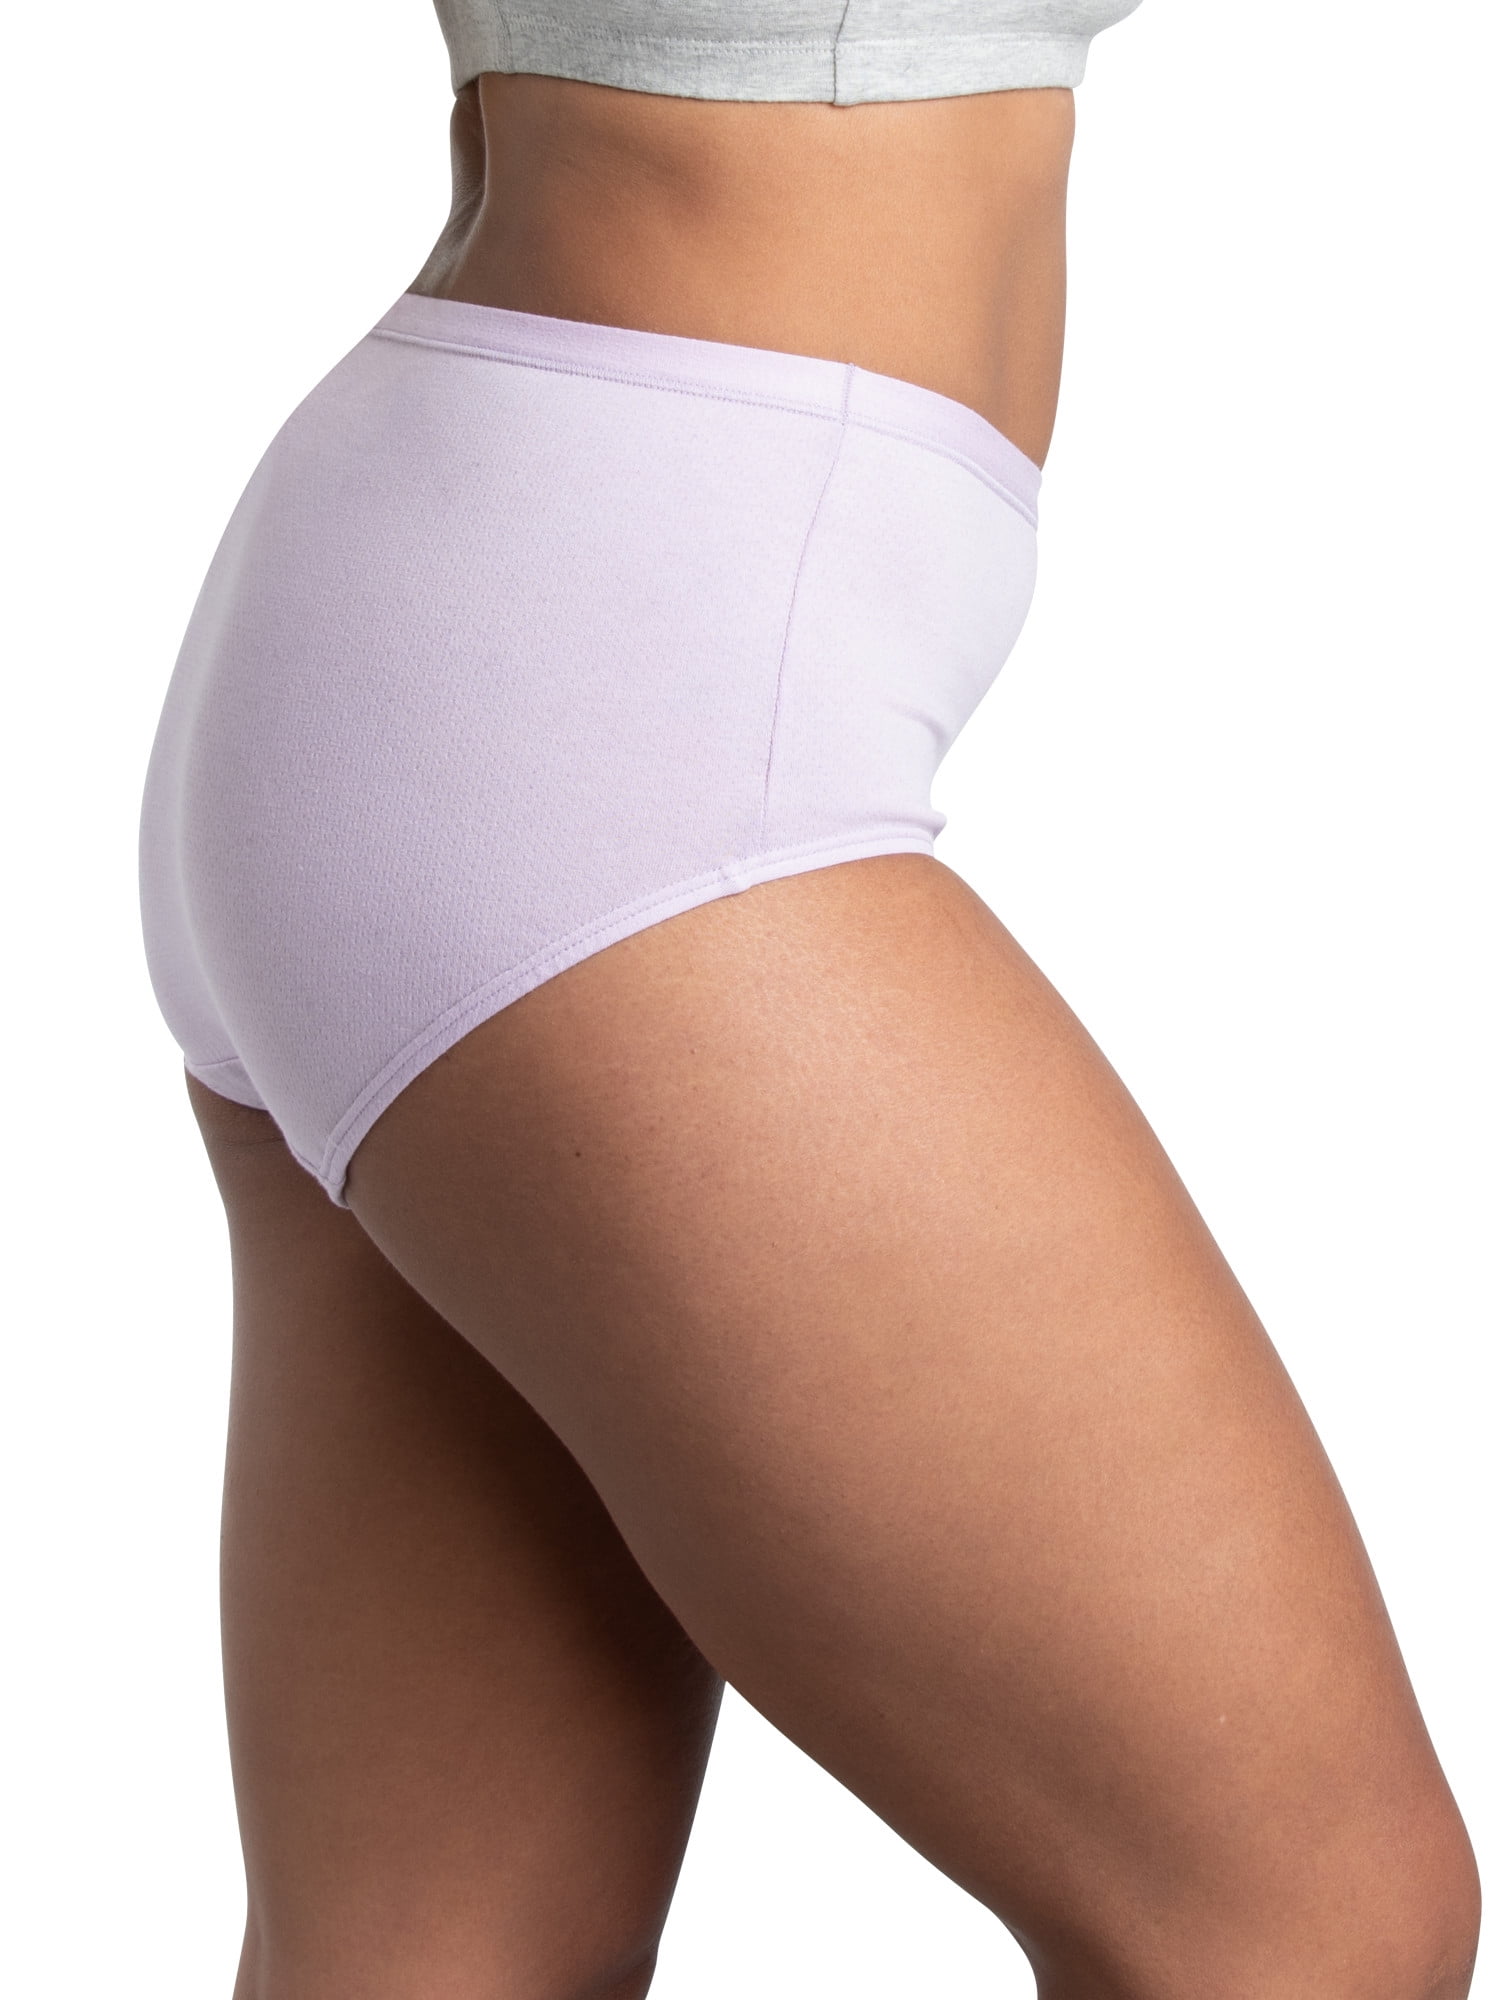 Fruit of the Loom Women's Breathable Cotton-Mesh Brief Underwear, 6 Pack 